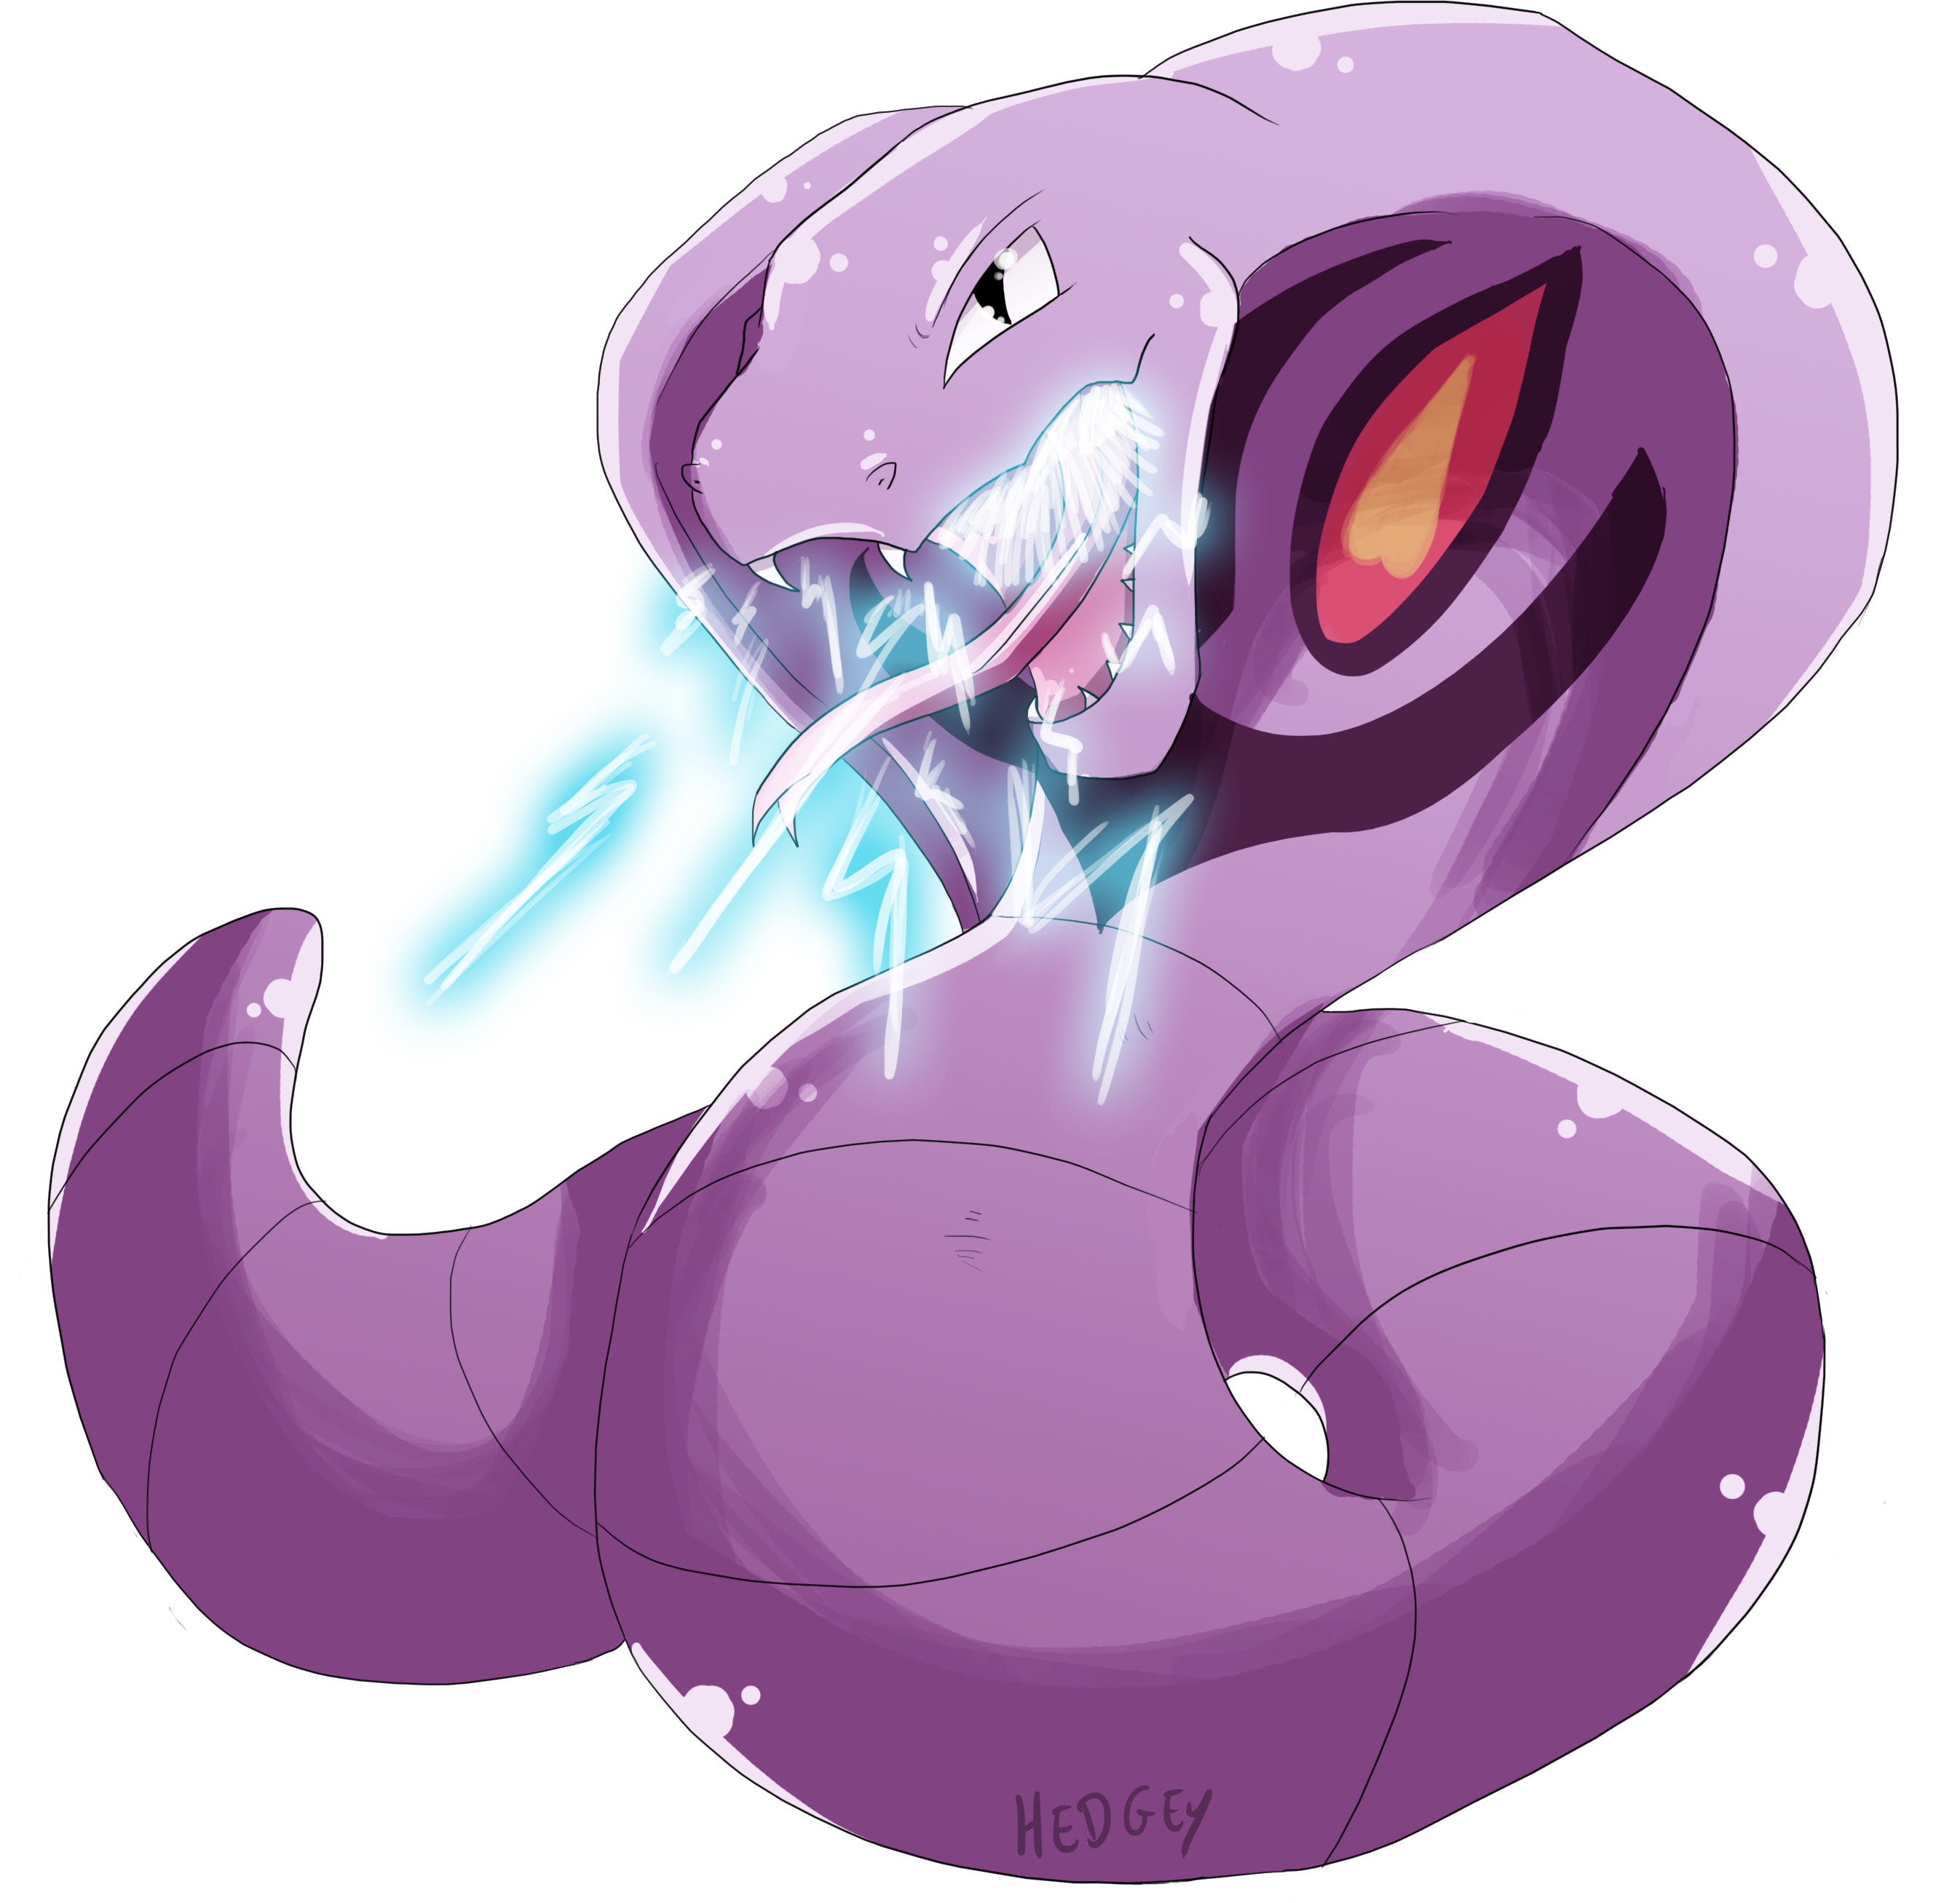 arbok-used-thunder-fang-game-art-hq-pokemon-art-tribute-by-hedgey